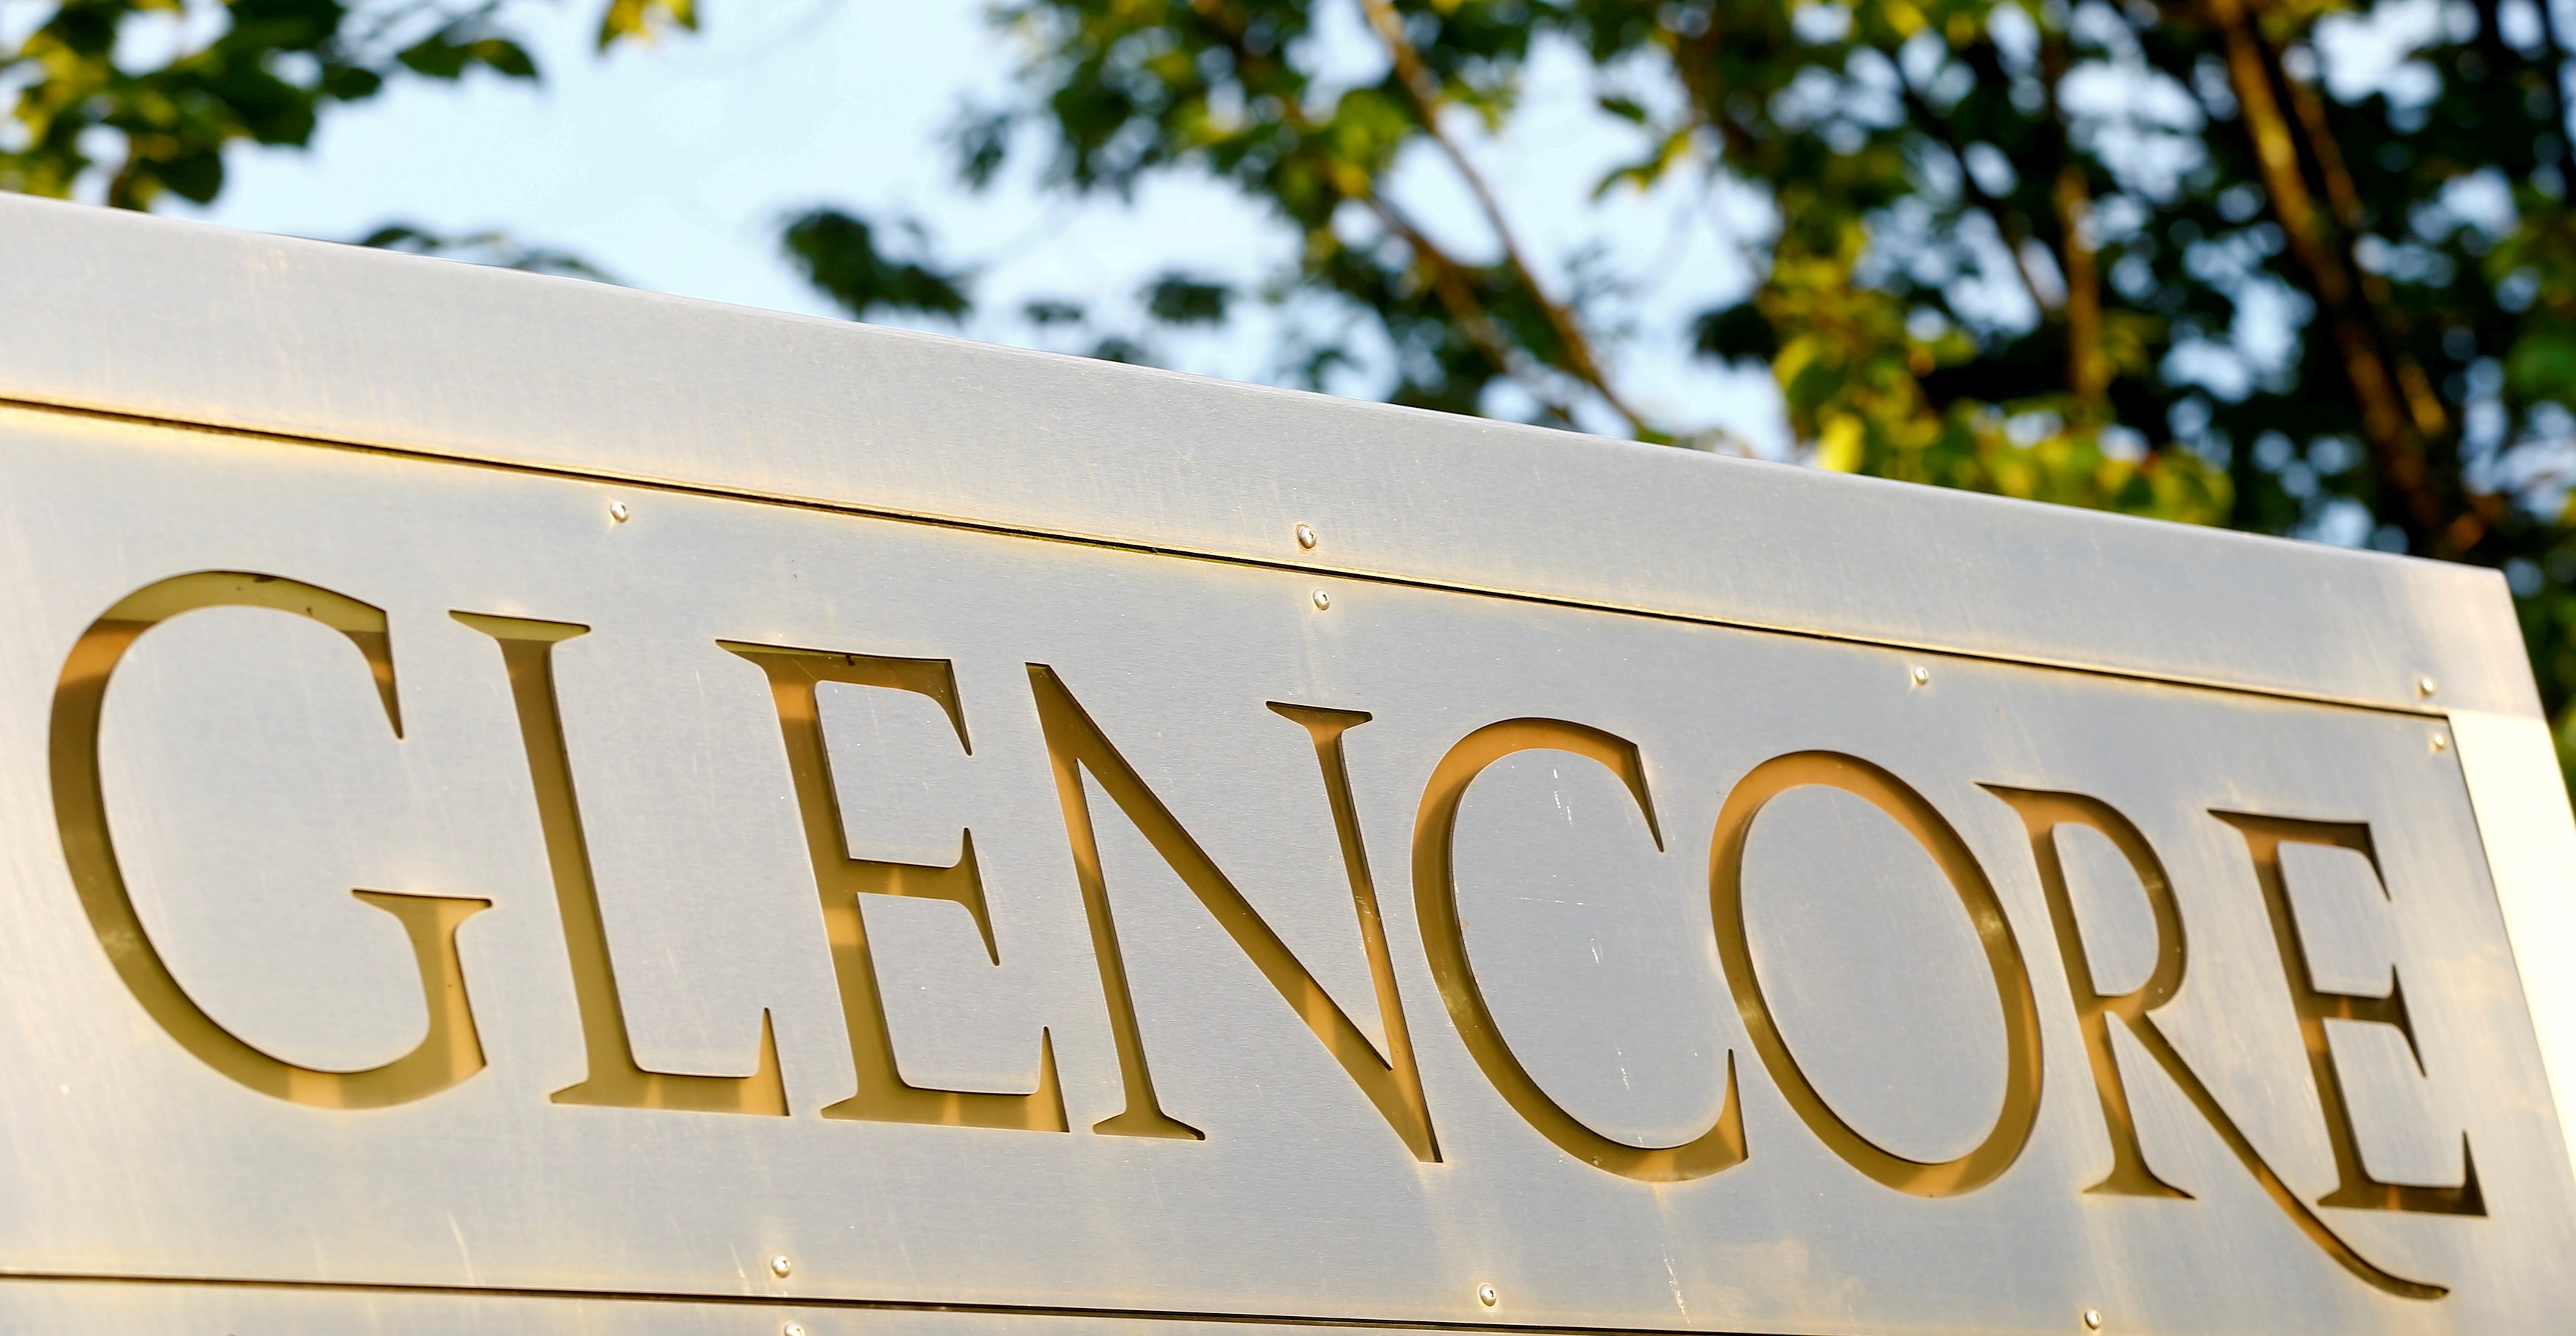 Glencore chooses to continue with Rusal for acquiring aluminium in 2023 despite ban on LME